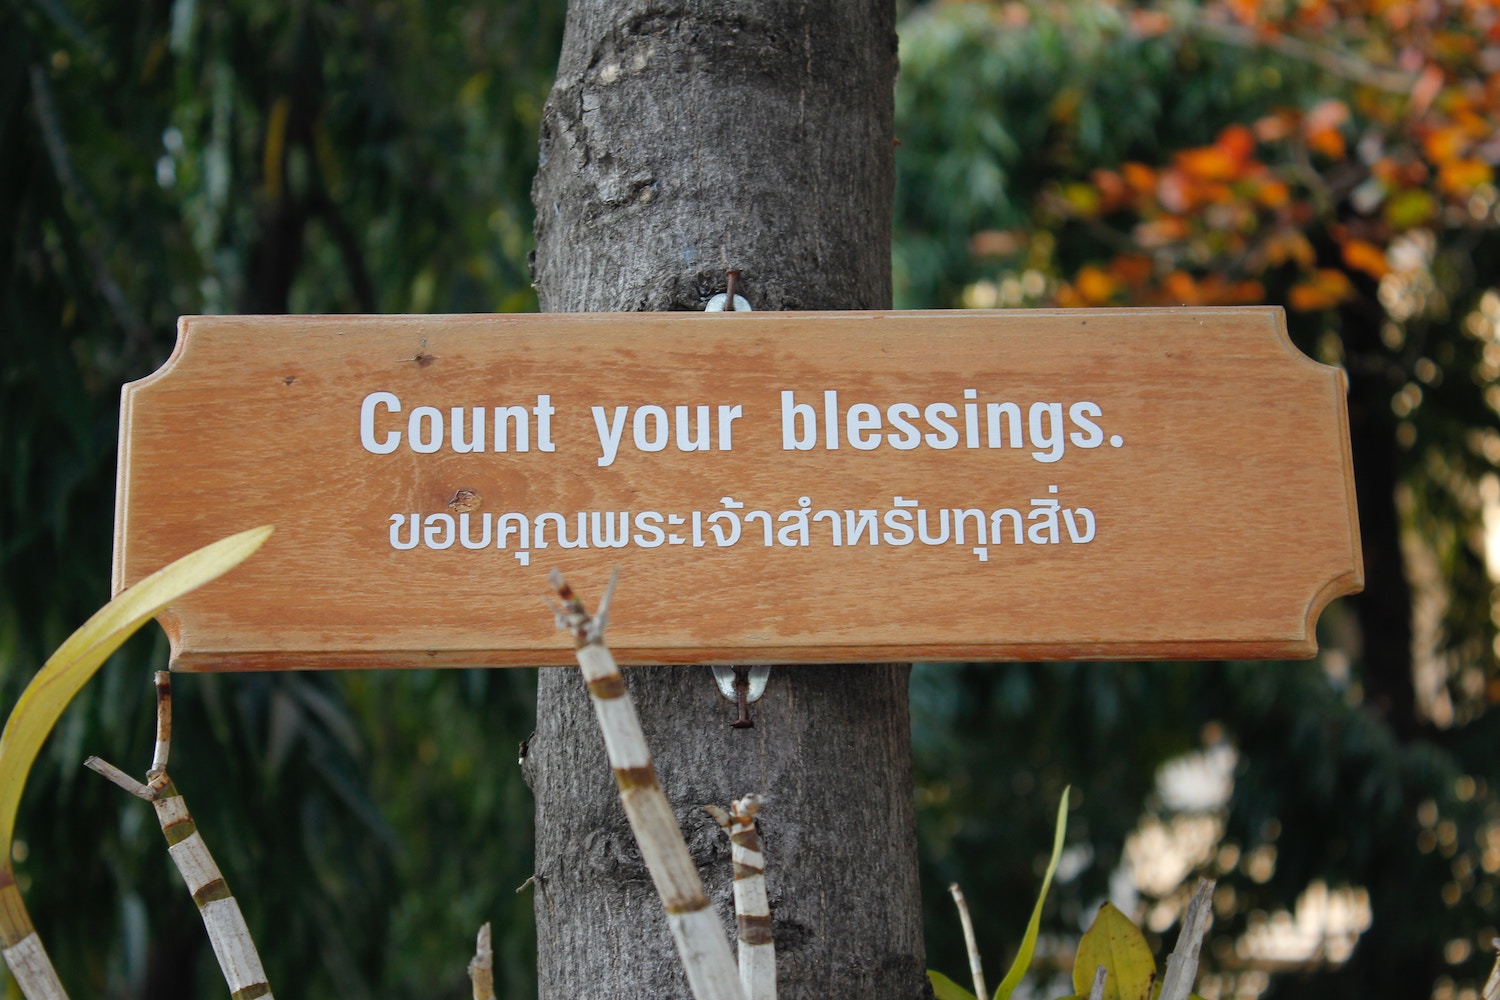 Sign on a tree that reads: Count your blessings in english and and in another language and alphabet